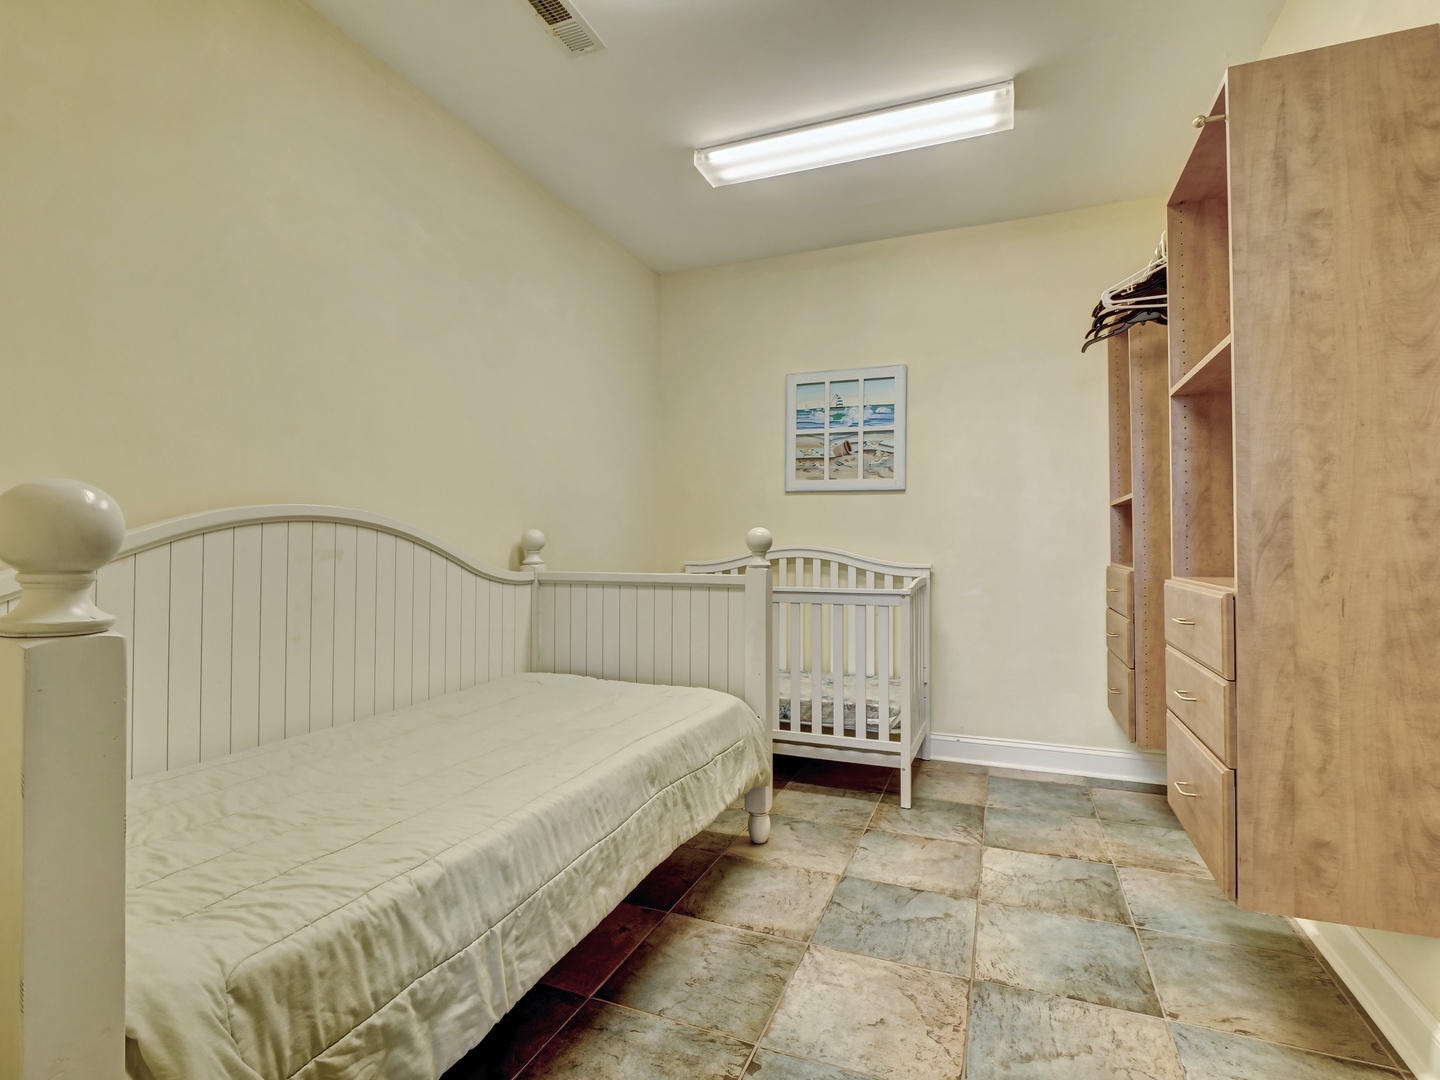 Guest room with a twin-sized bed and crib